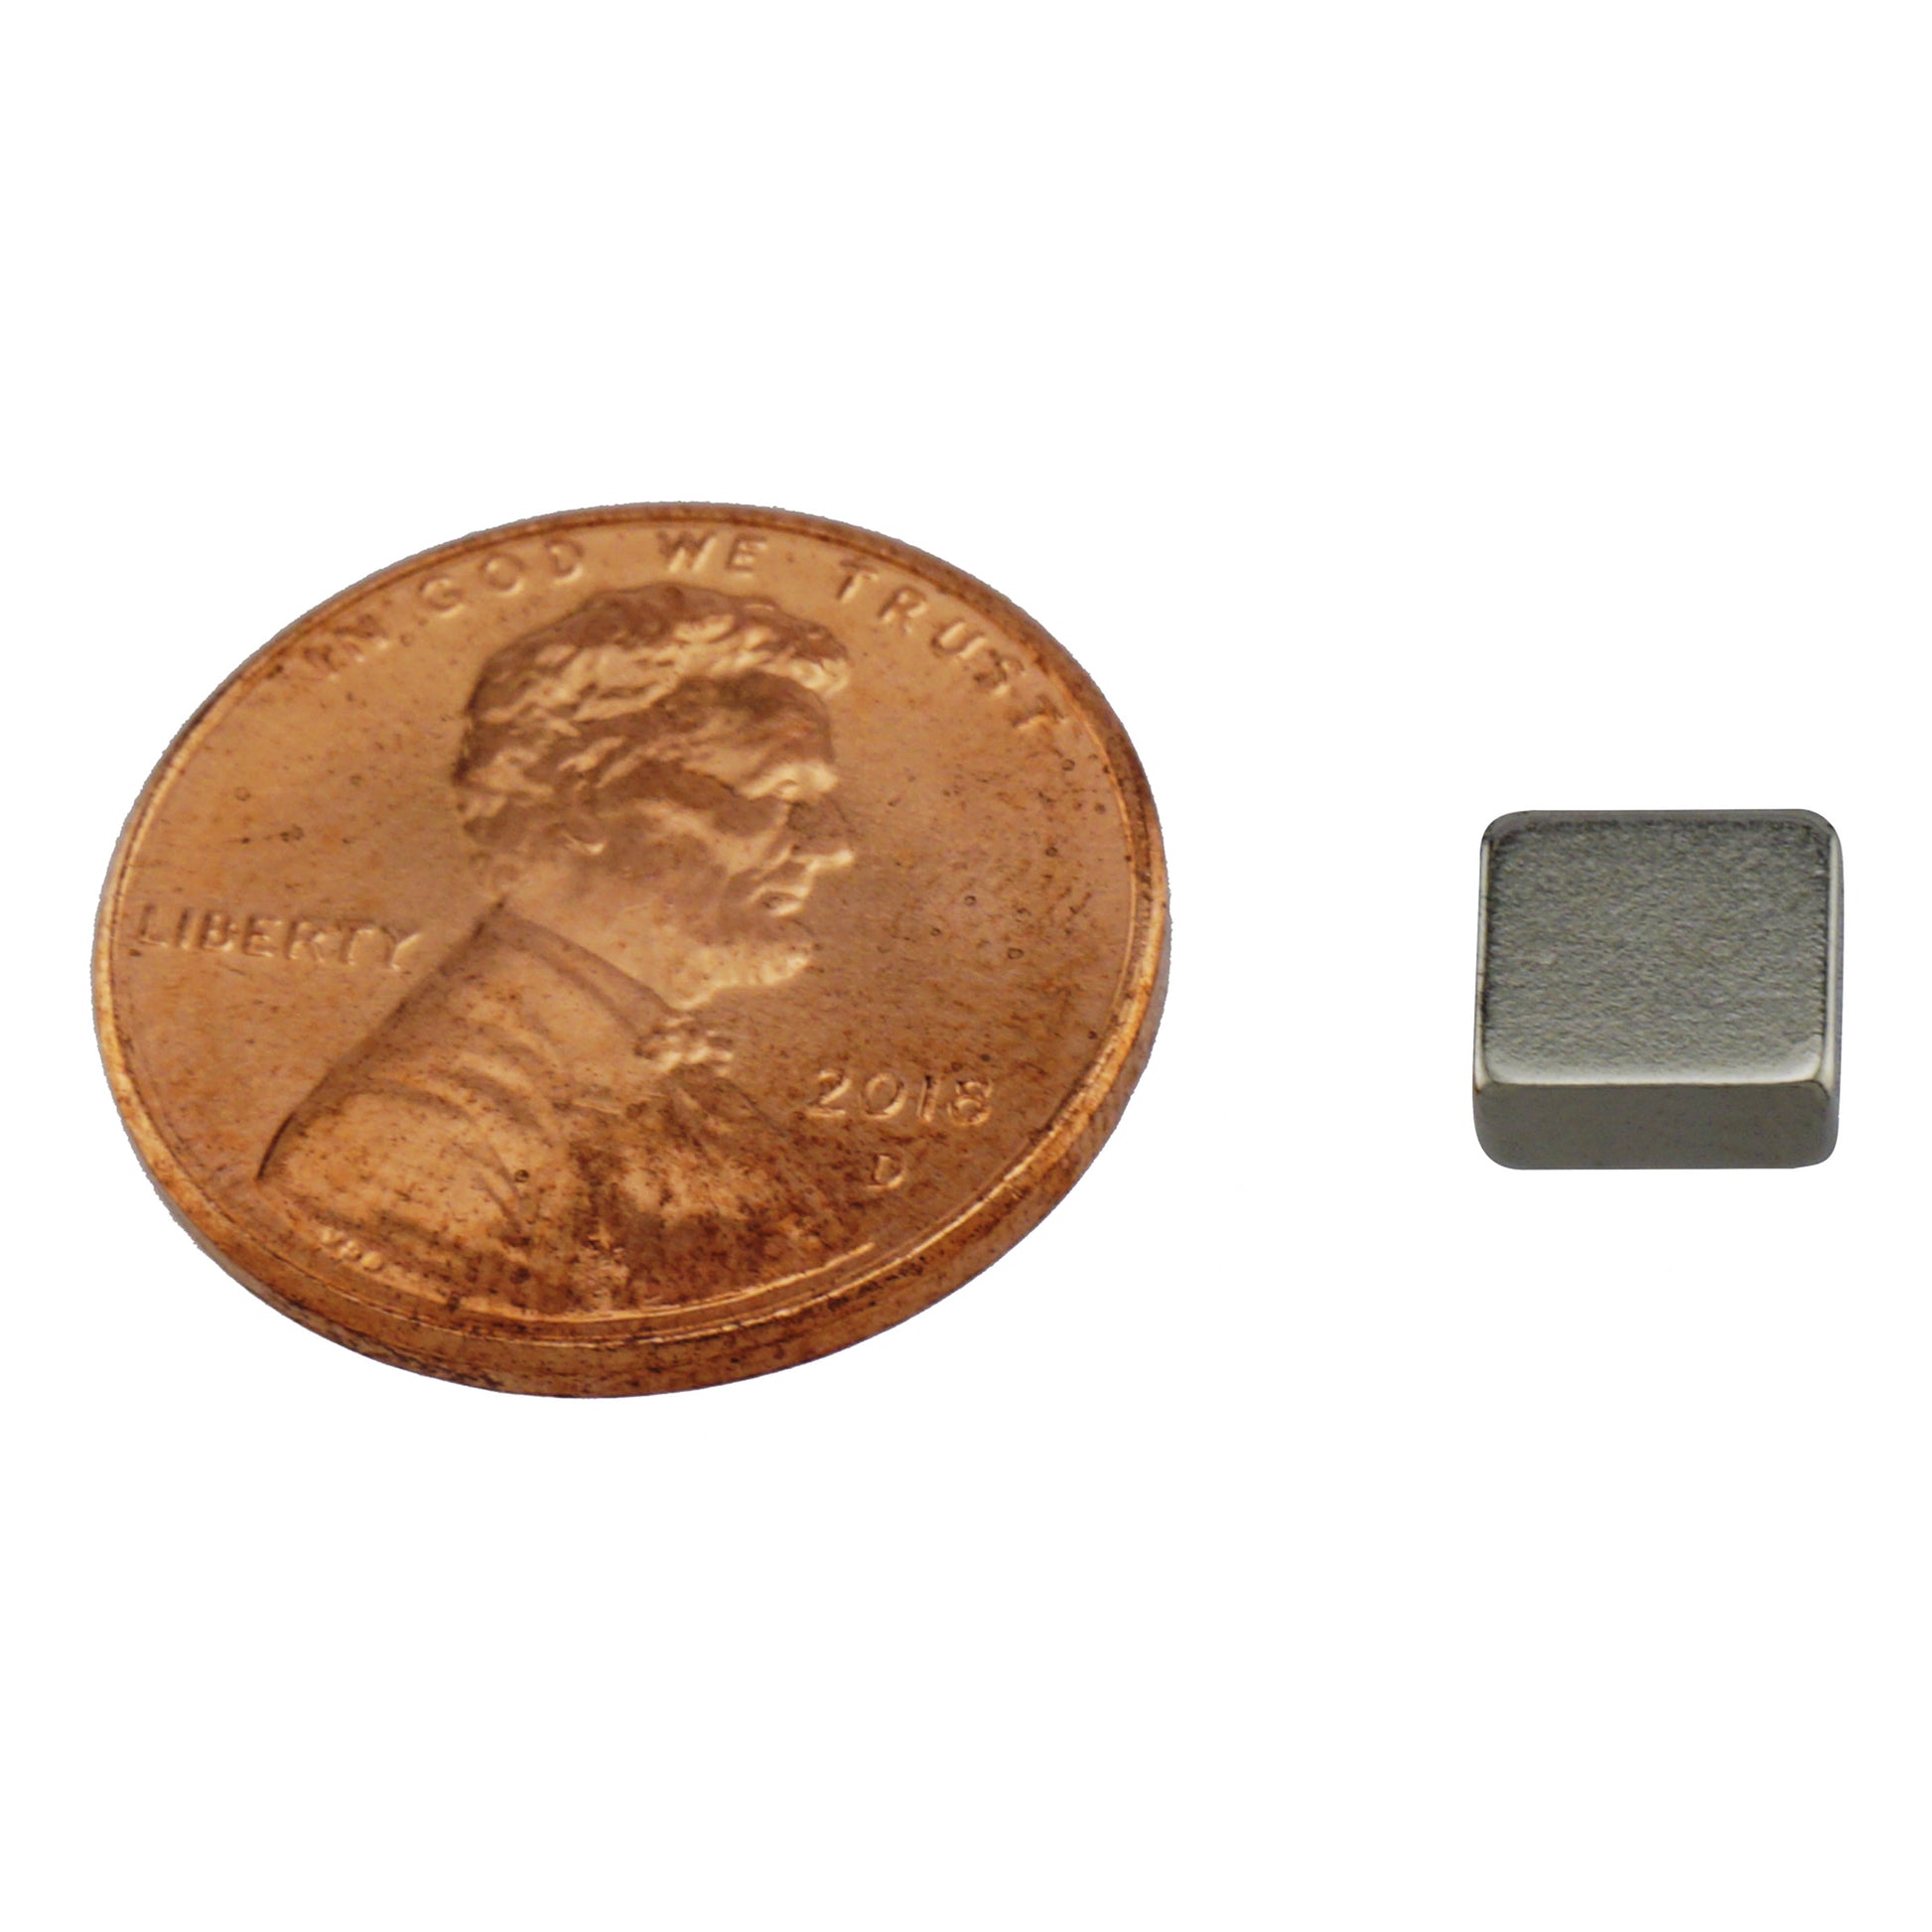 Load image into Gallery viewer, NB12525N-35 Neodymium Block Magnet - Compared to Penny for Size Reference